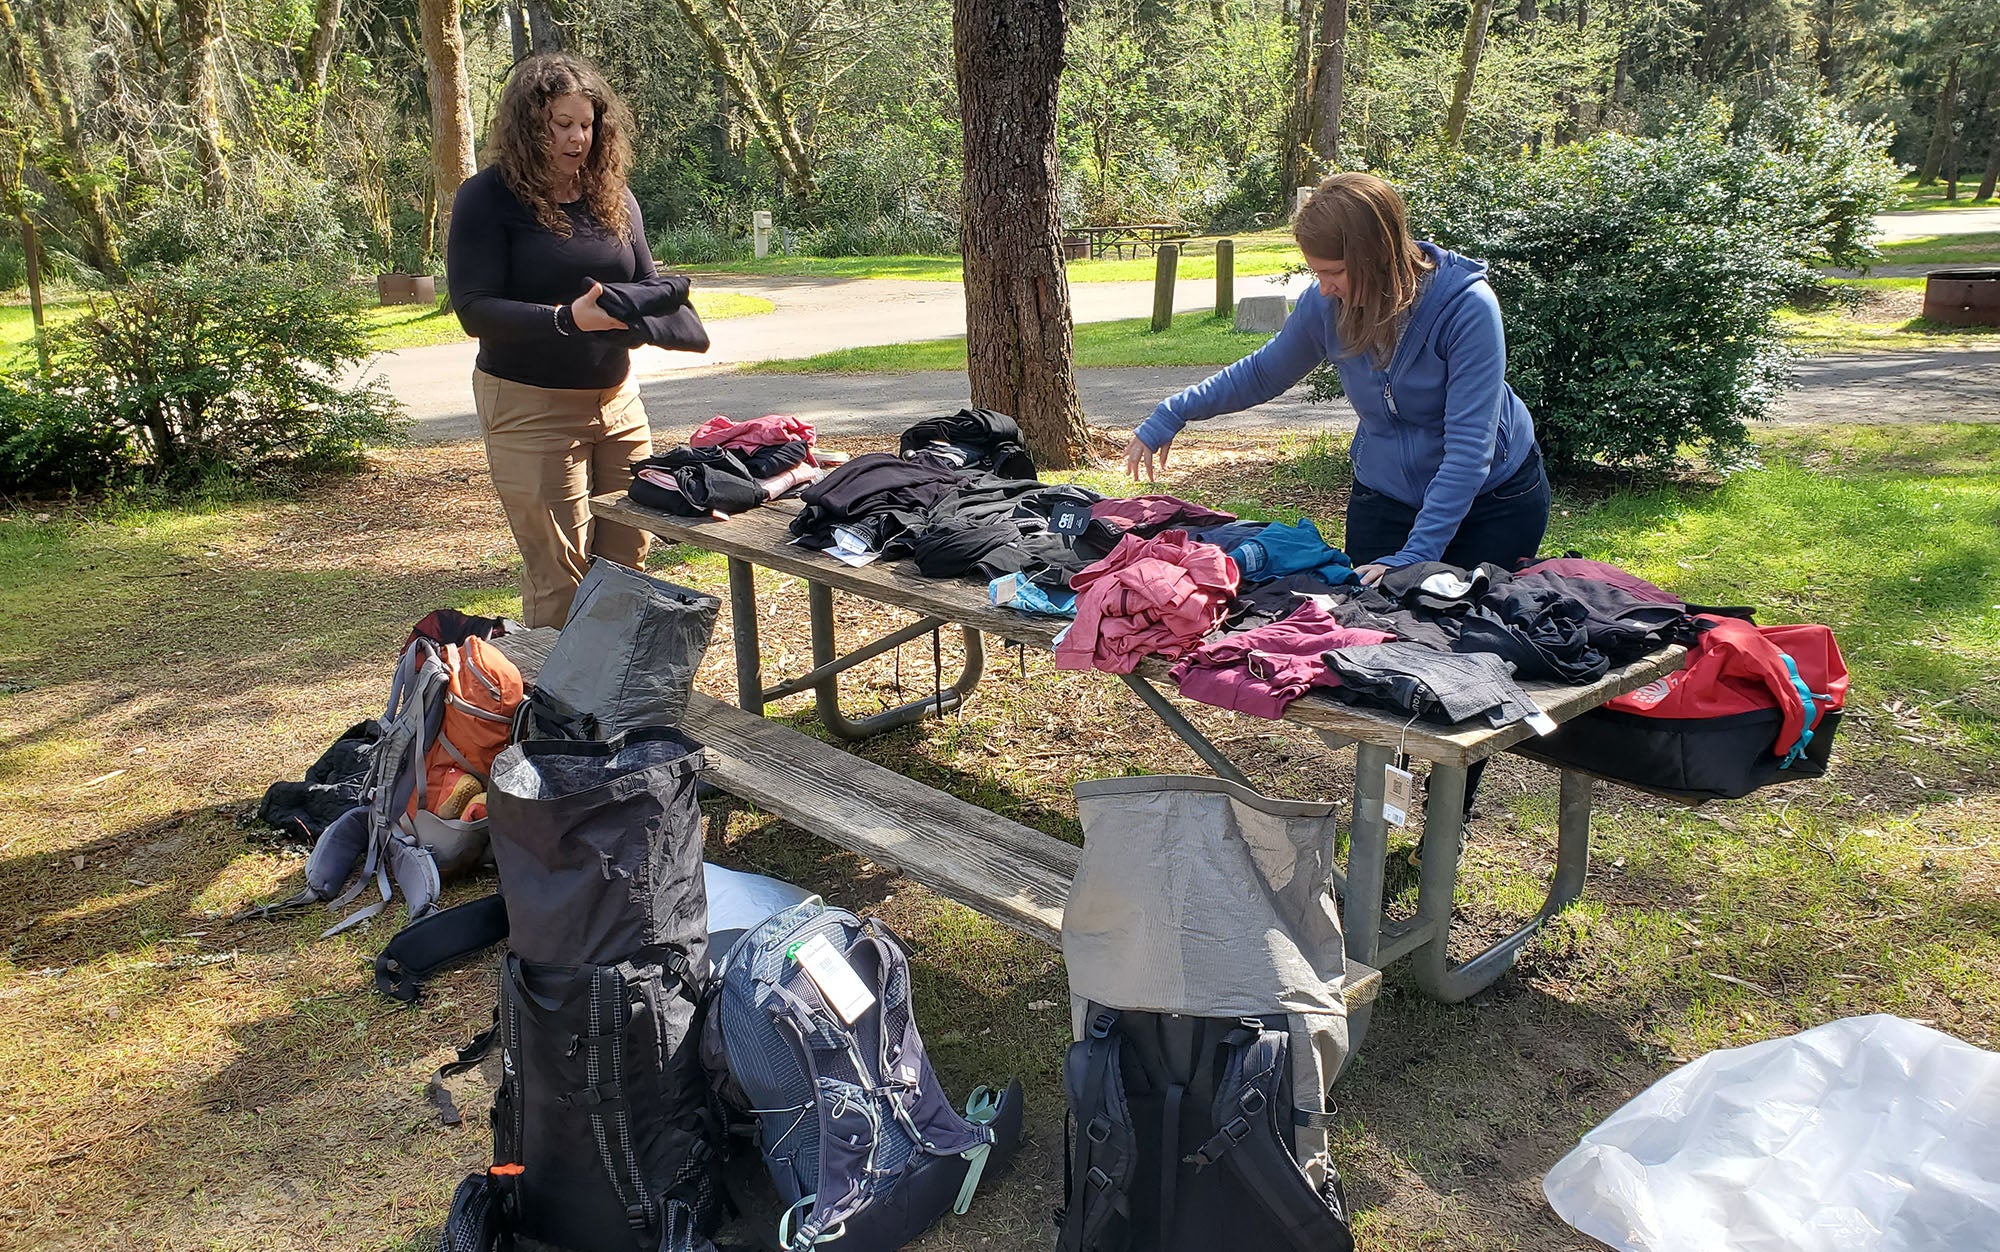 Two of our testers sorting thermal underwear for women at the start of our testing trip.